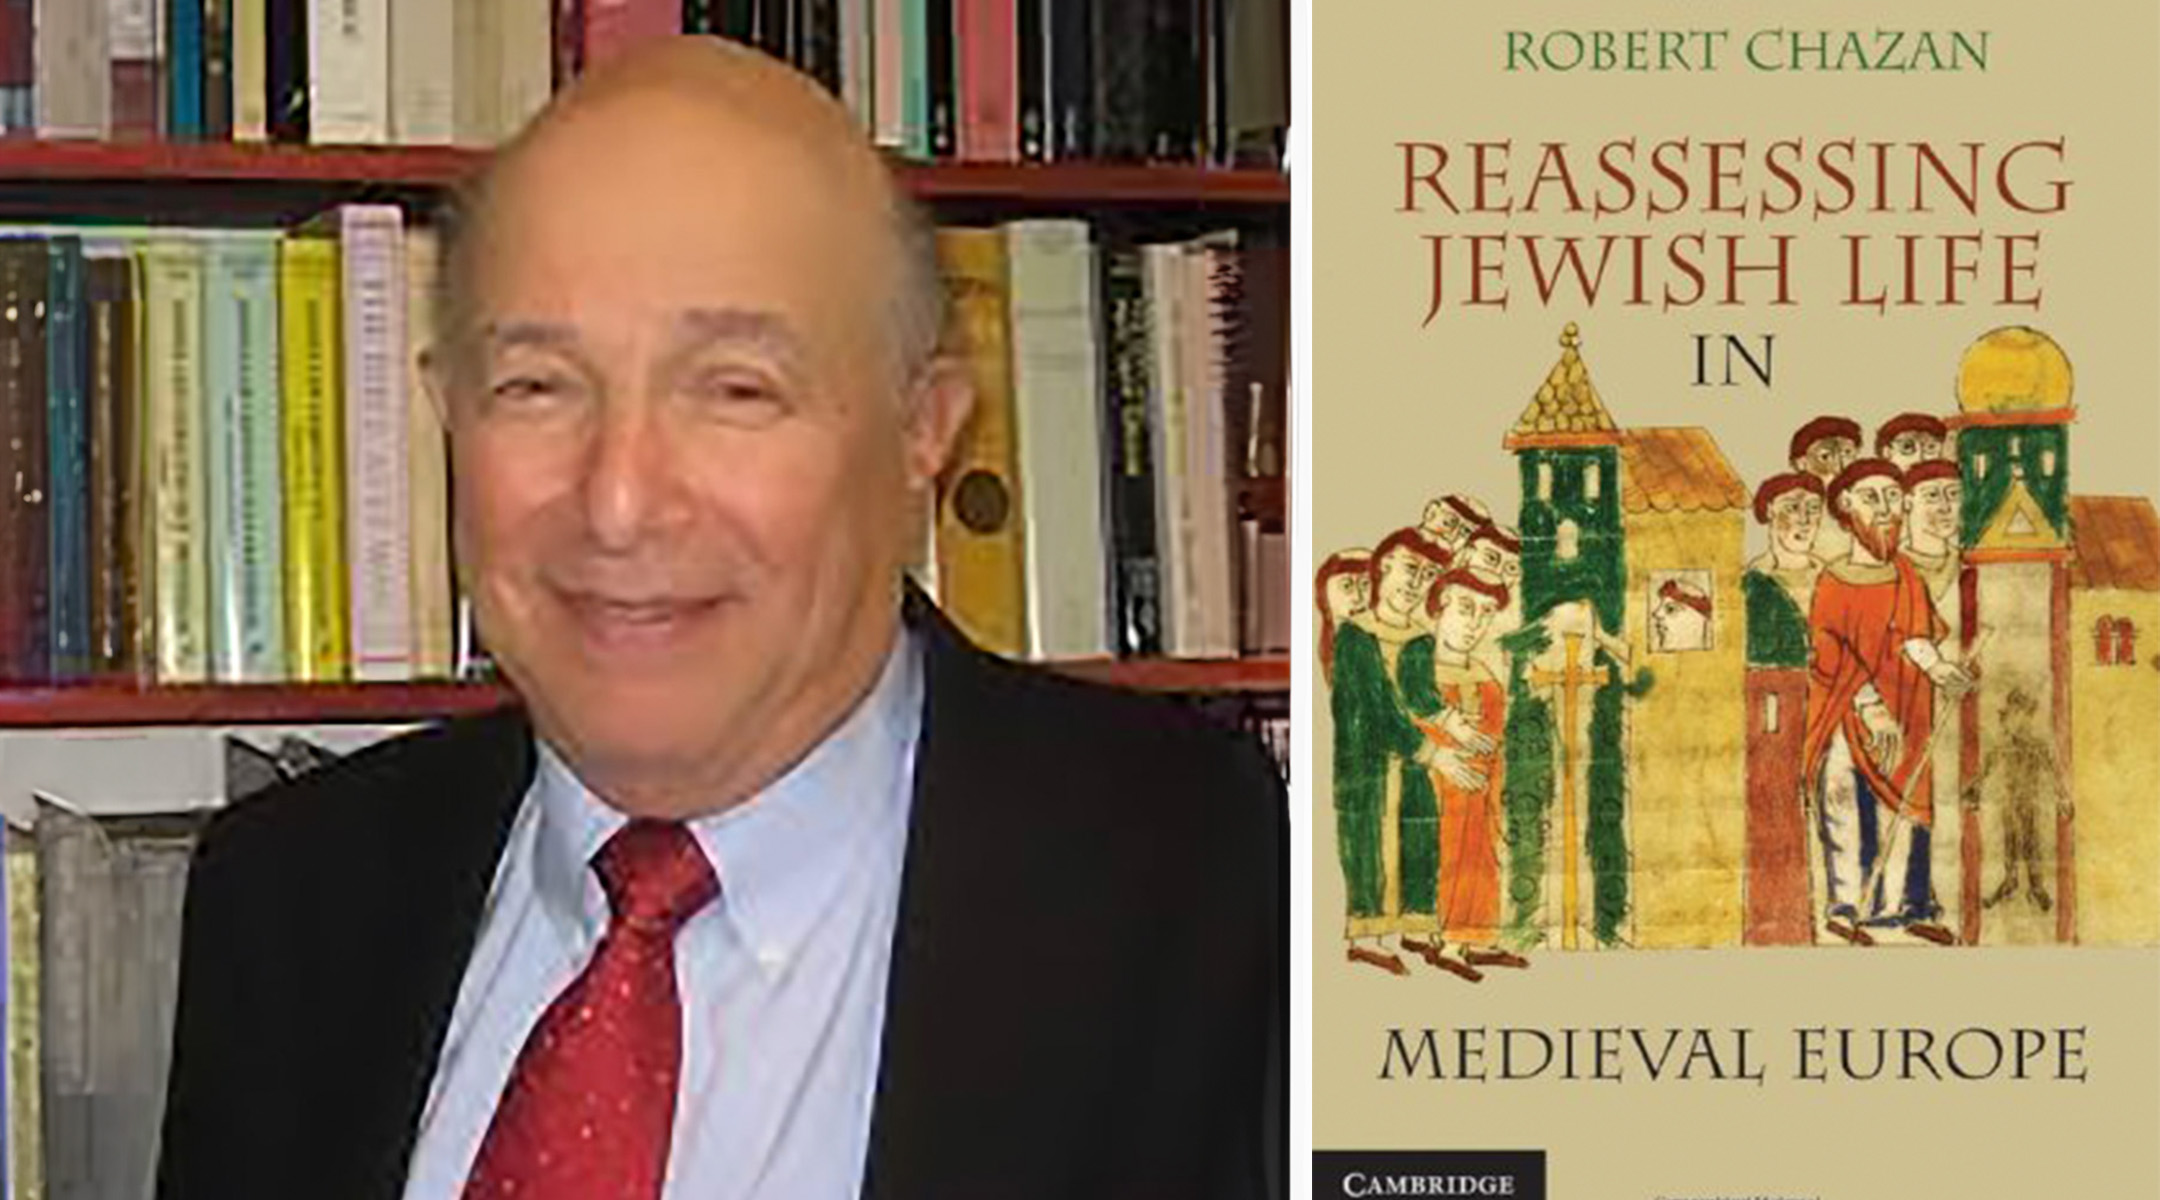 Robert Chazan was one of the leading scholars in the field of Jewish history and Christian-Jewish relations in the high Middle Ages. (NYU; Cambridge University Press)